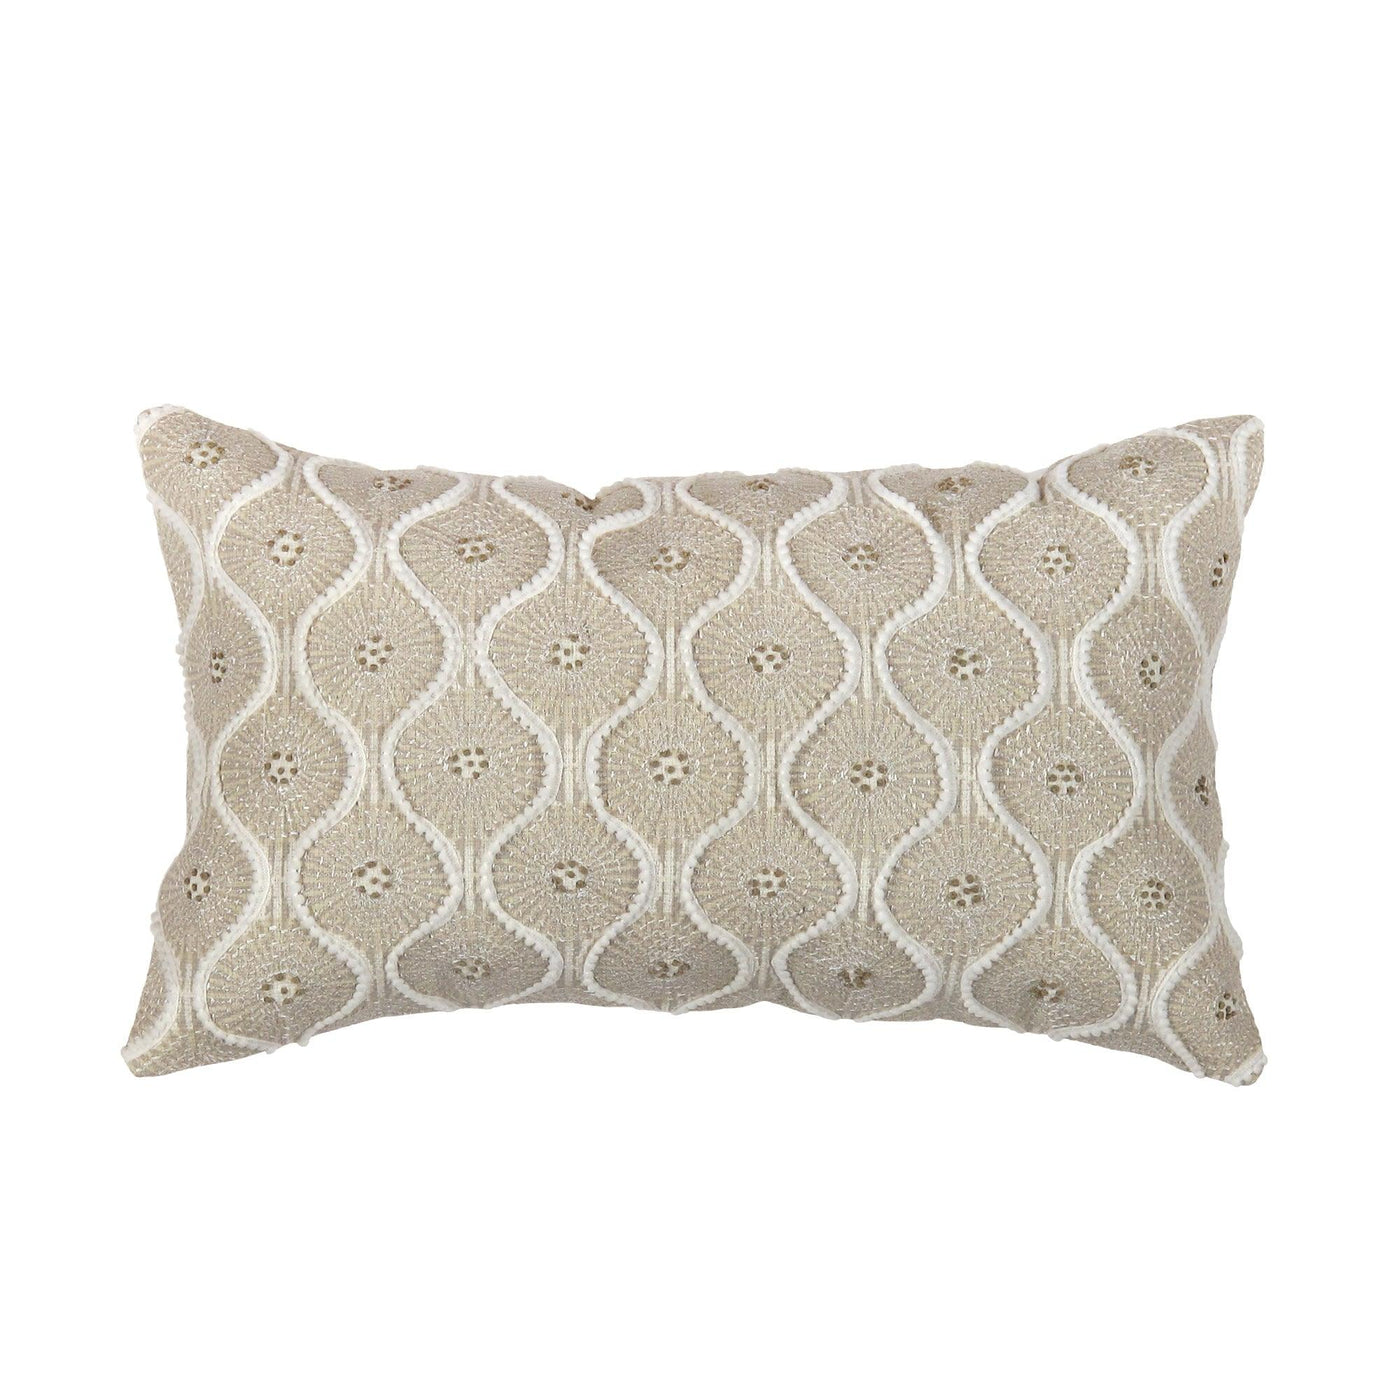 Canvello Naples Embroidered Pillow, Beige/Ivory